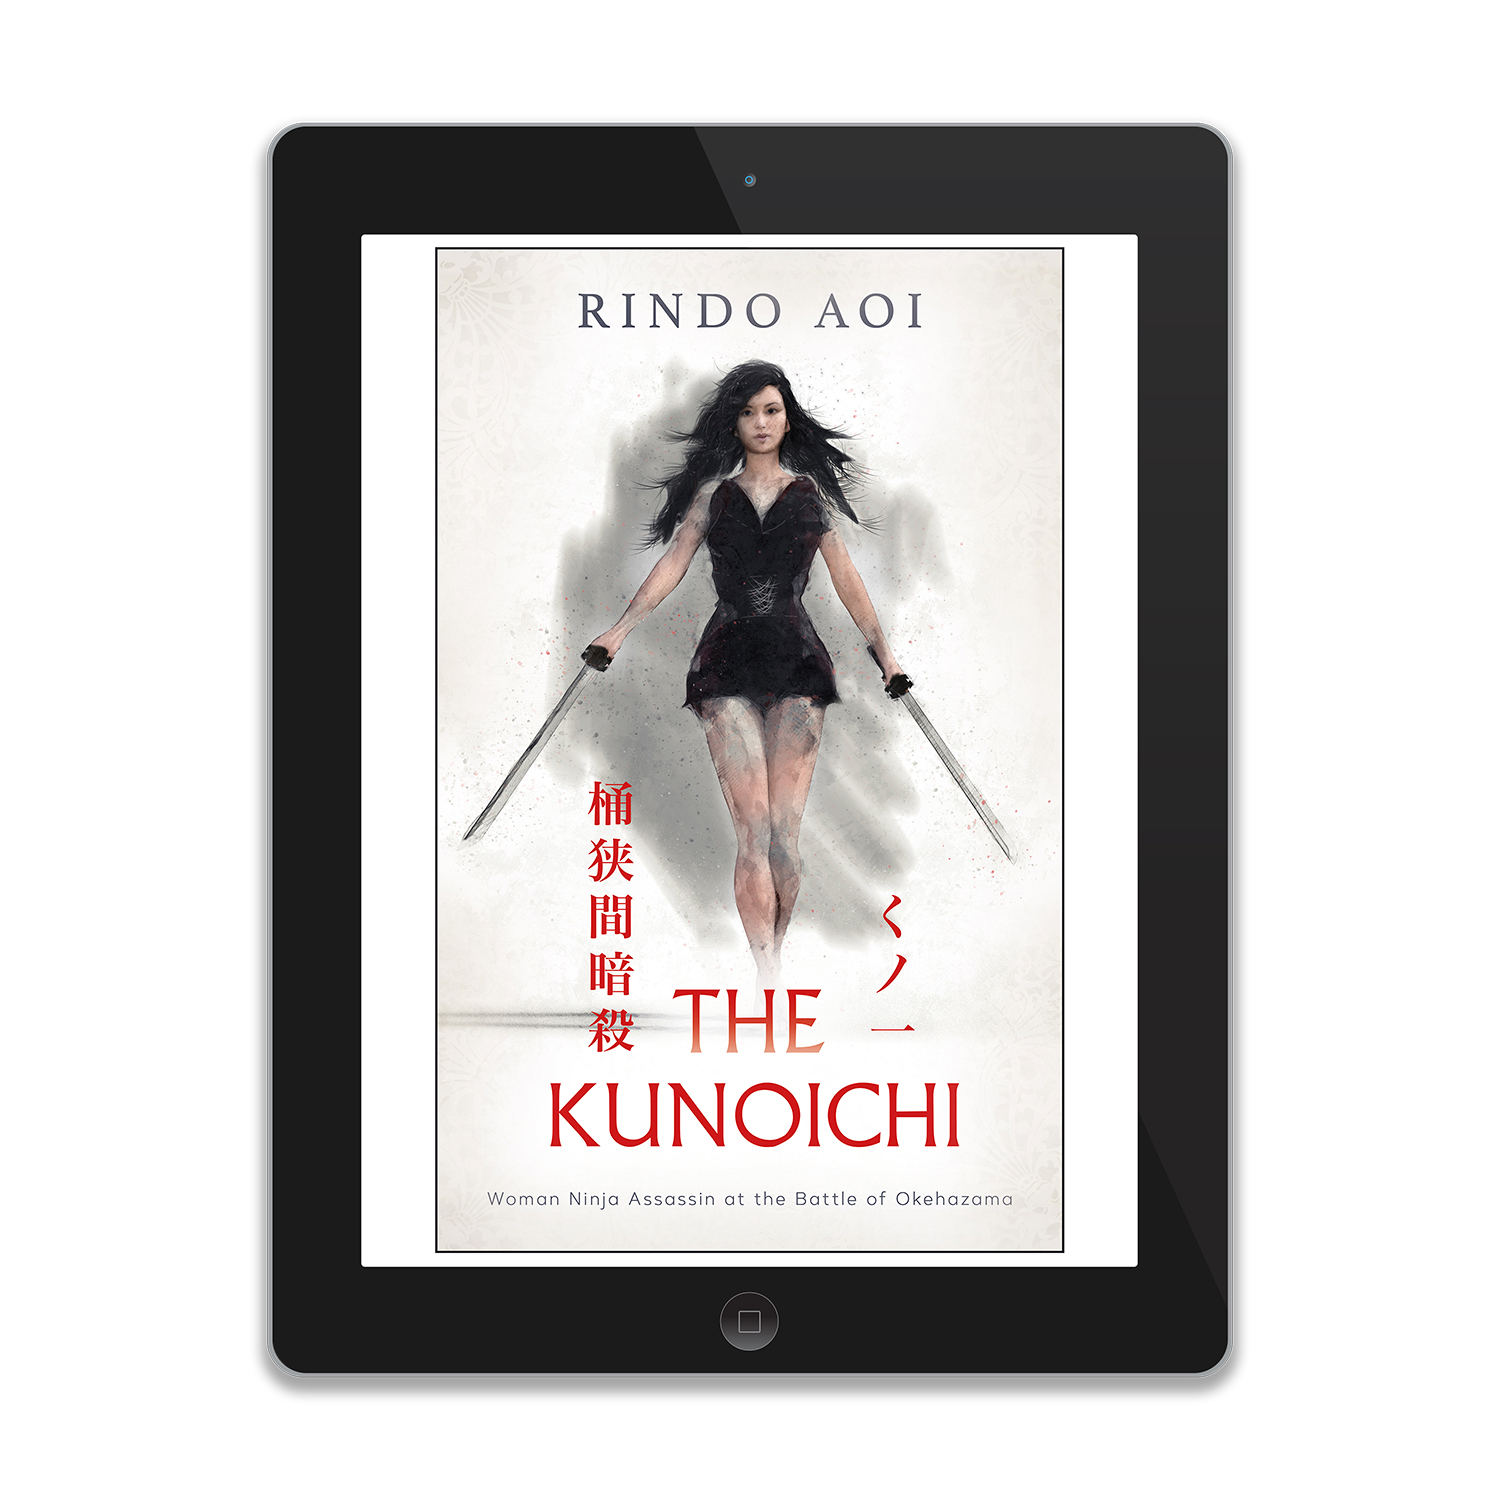 'The Kunoichi' is a sweeping Jpanese historical fantasy, by Rindo Aoi. The book cover was designed by Mark Thomas, of coverness.com. To find out more about my book design services, please visit www.coverness.com.